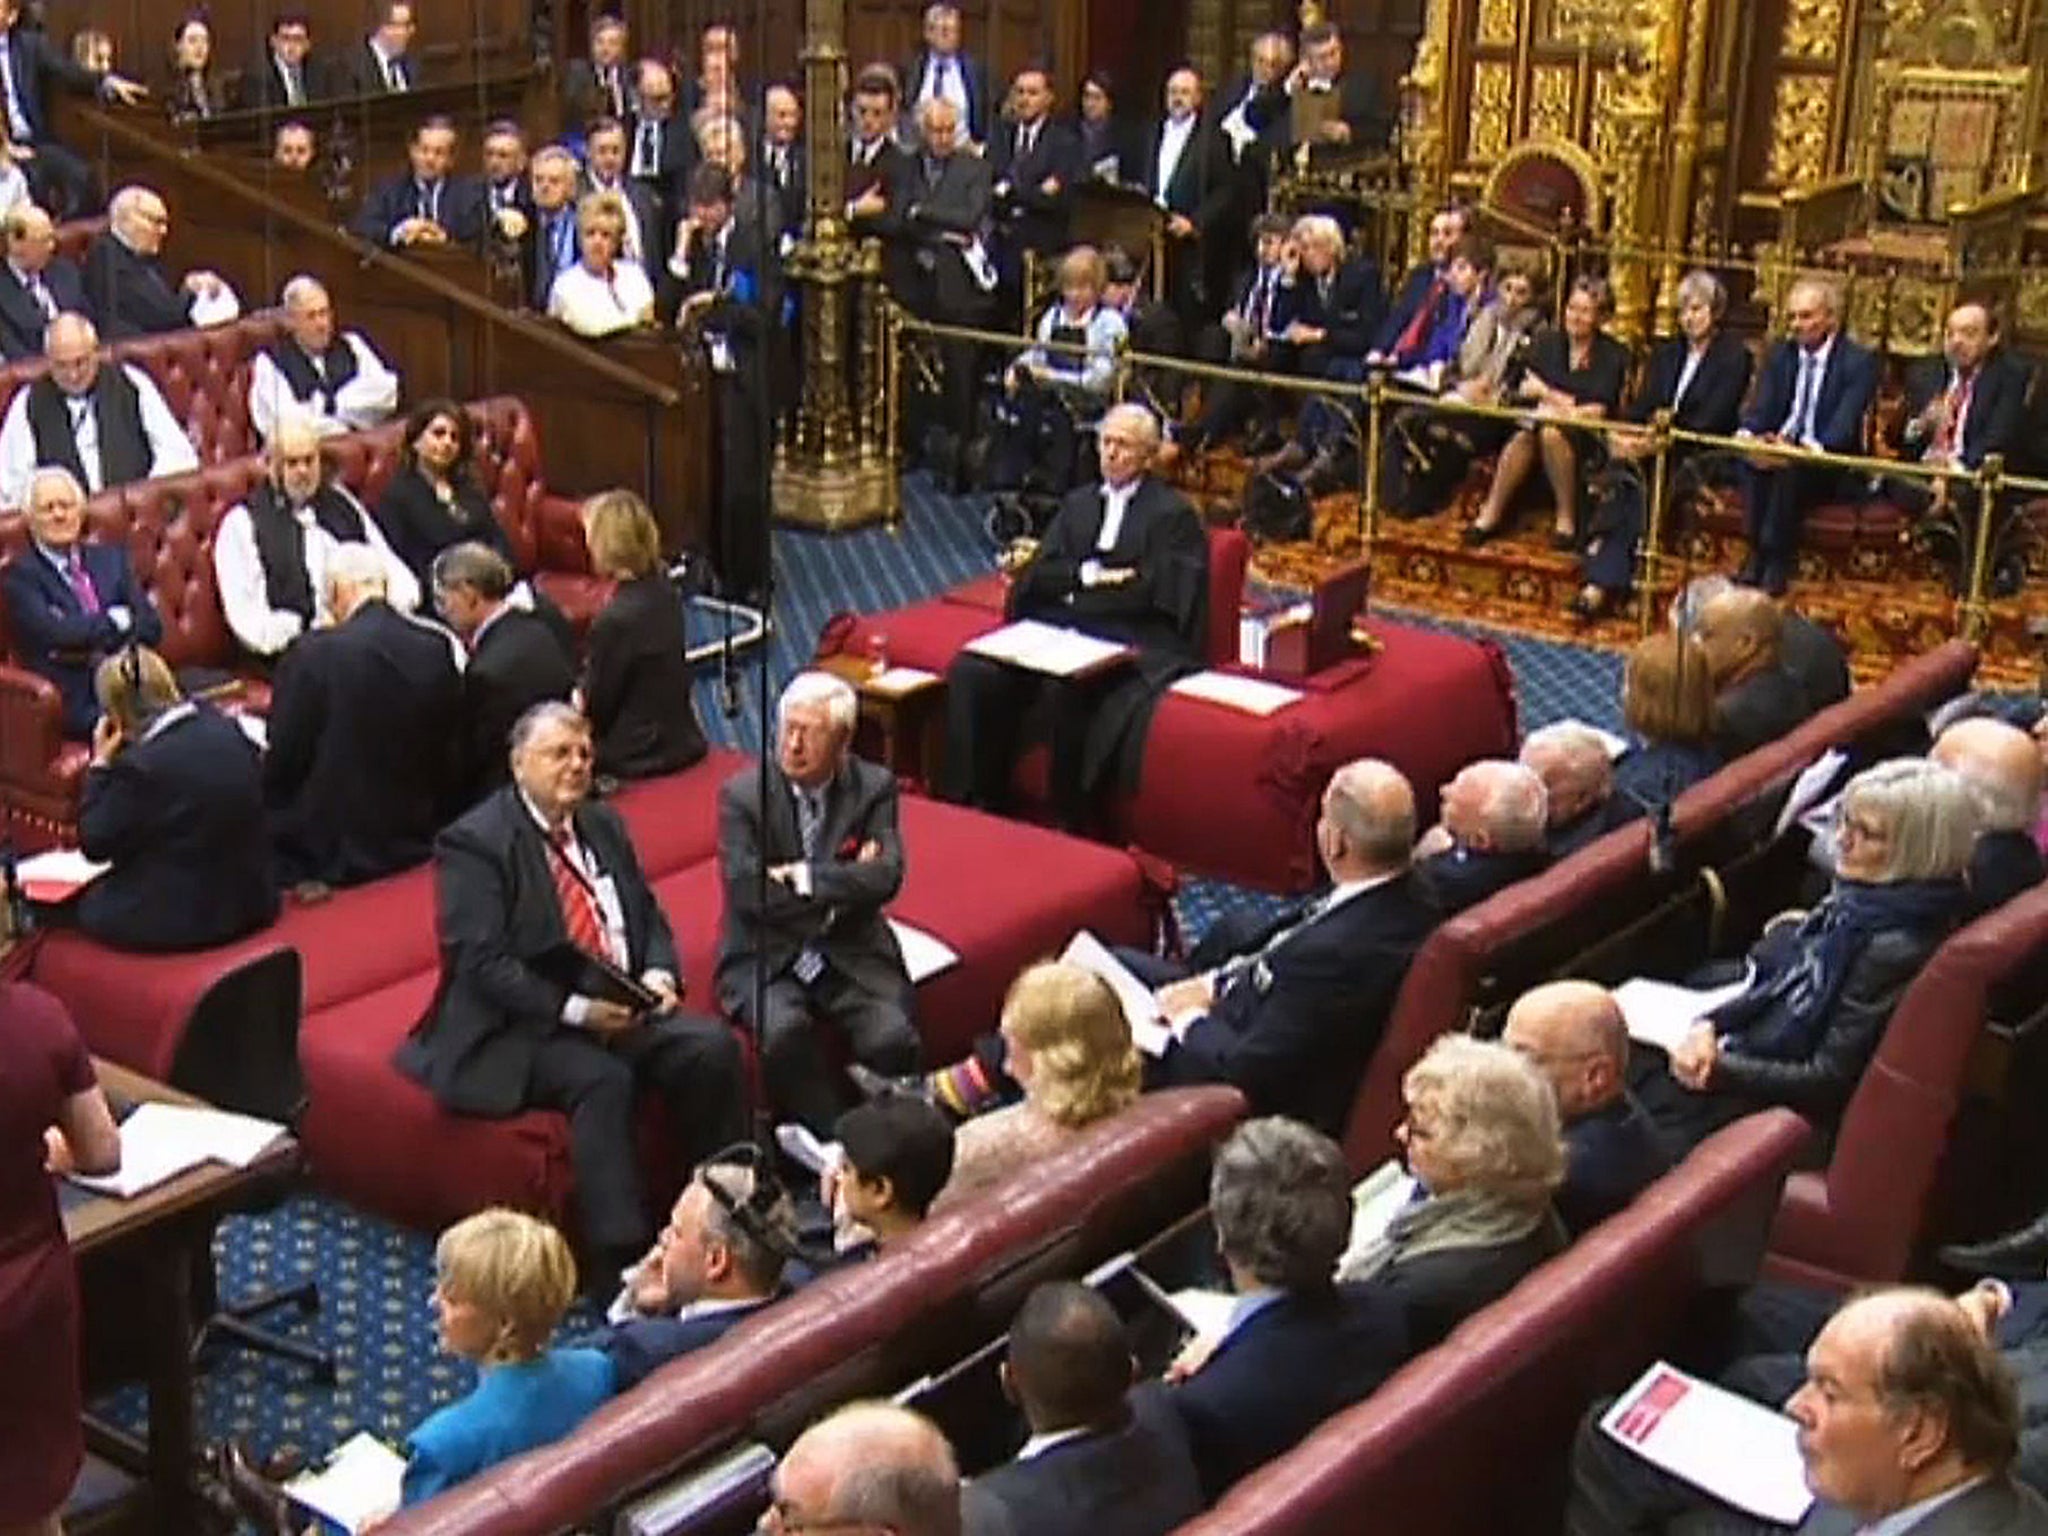 Prime Minister Theresa May sits behind the speaker (top right) as Baroness Smith of Basildon speaks in the House of Lords, London, during a debate on the Brexit Bill